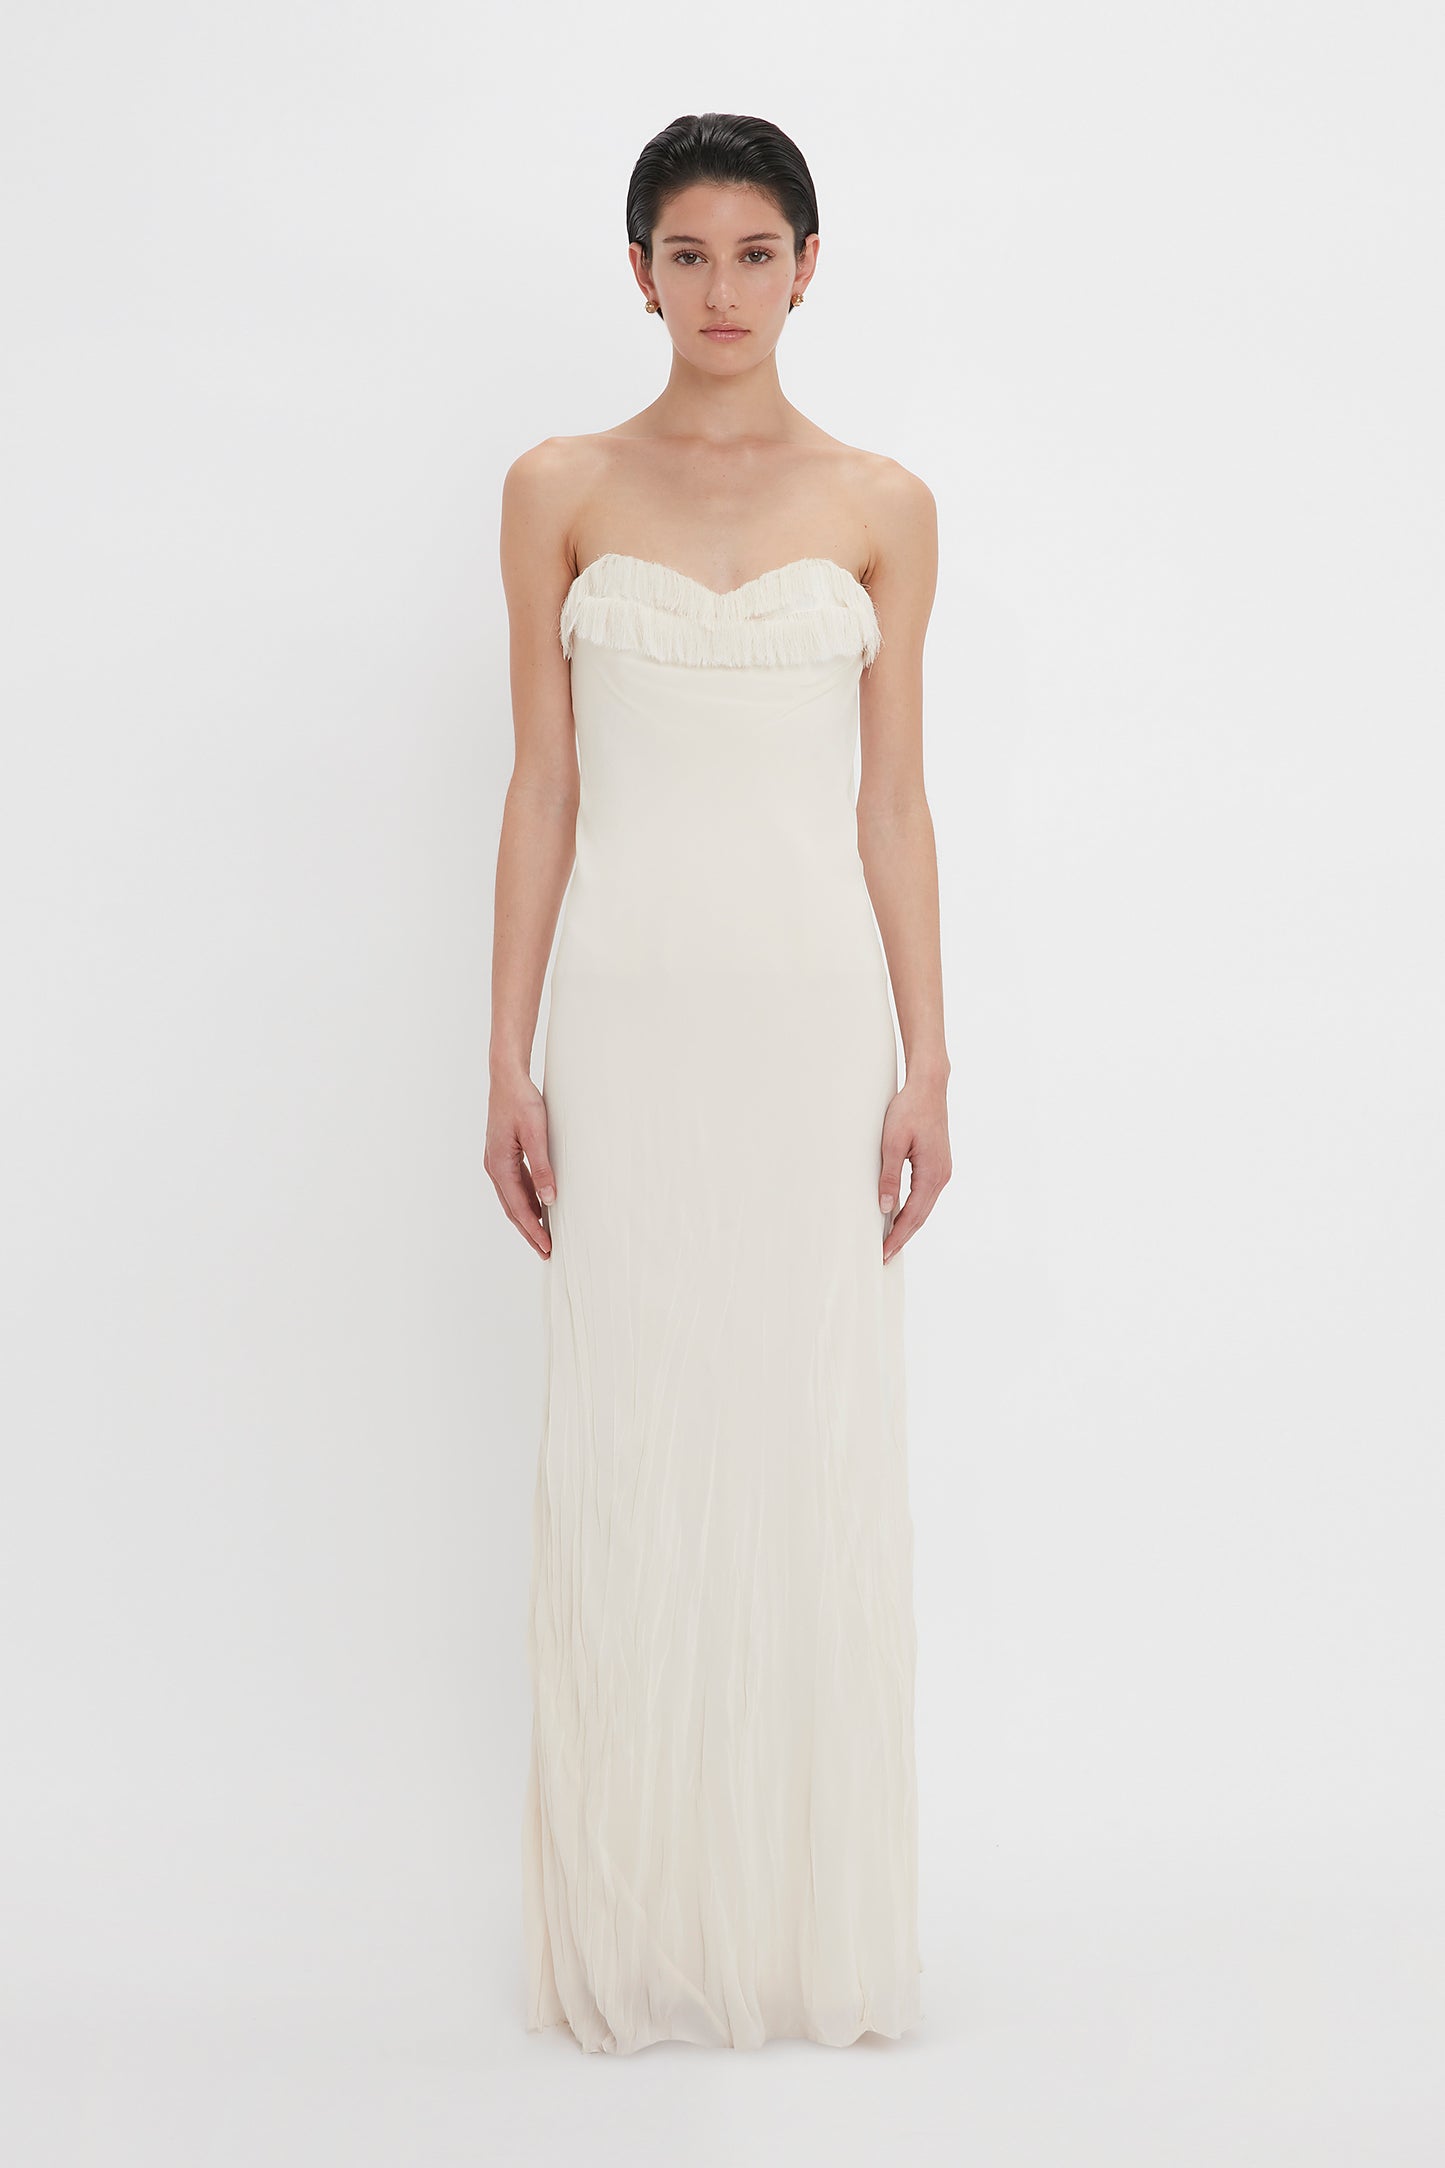 A woman in a Victoria Beckham Exclusive Floor-Length Corset Detail Gown In Ivory stands against a plain white background, looking directly at the camera.